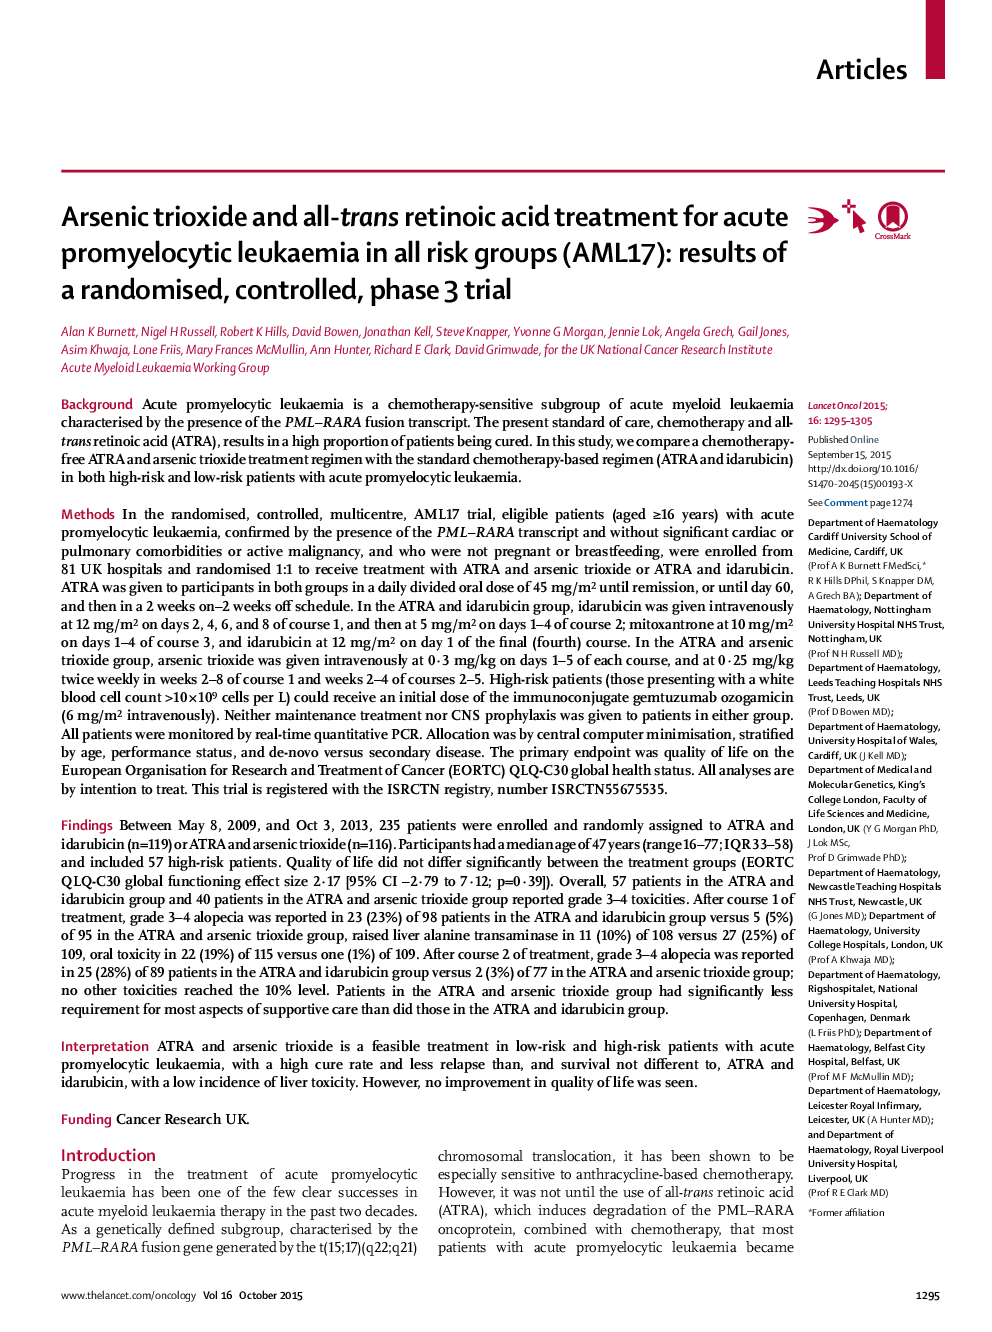 Arsenic trioxide and all-trans retinoic acid treatment for acute promyelocytic leukaemia in all risk groups (AML17): results of a randomised, controlled, phase 3 trial